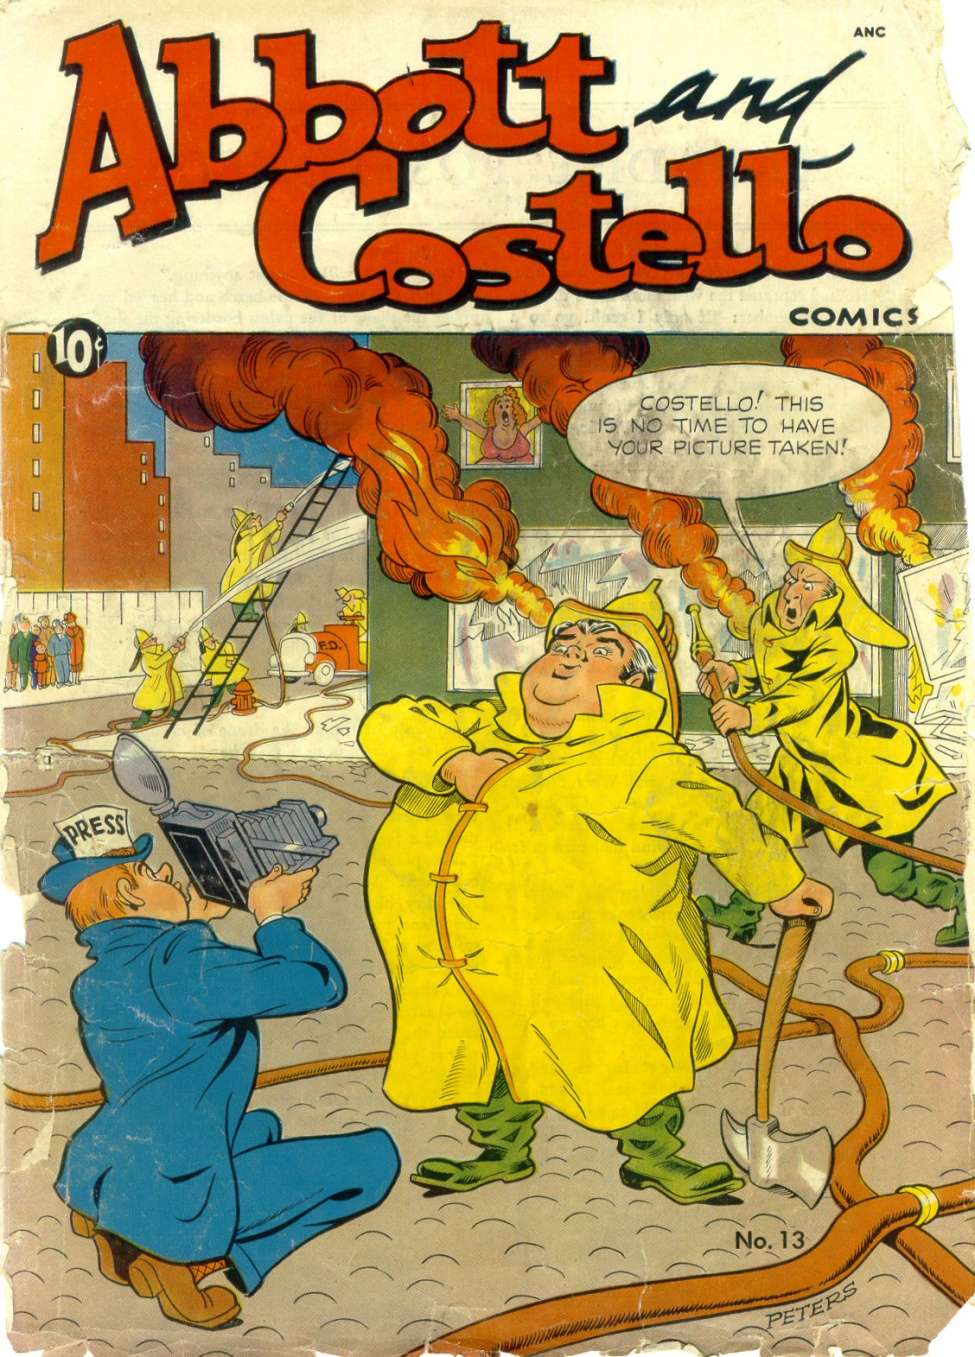 Book Cover For Abbott and Costello Comics 13